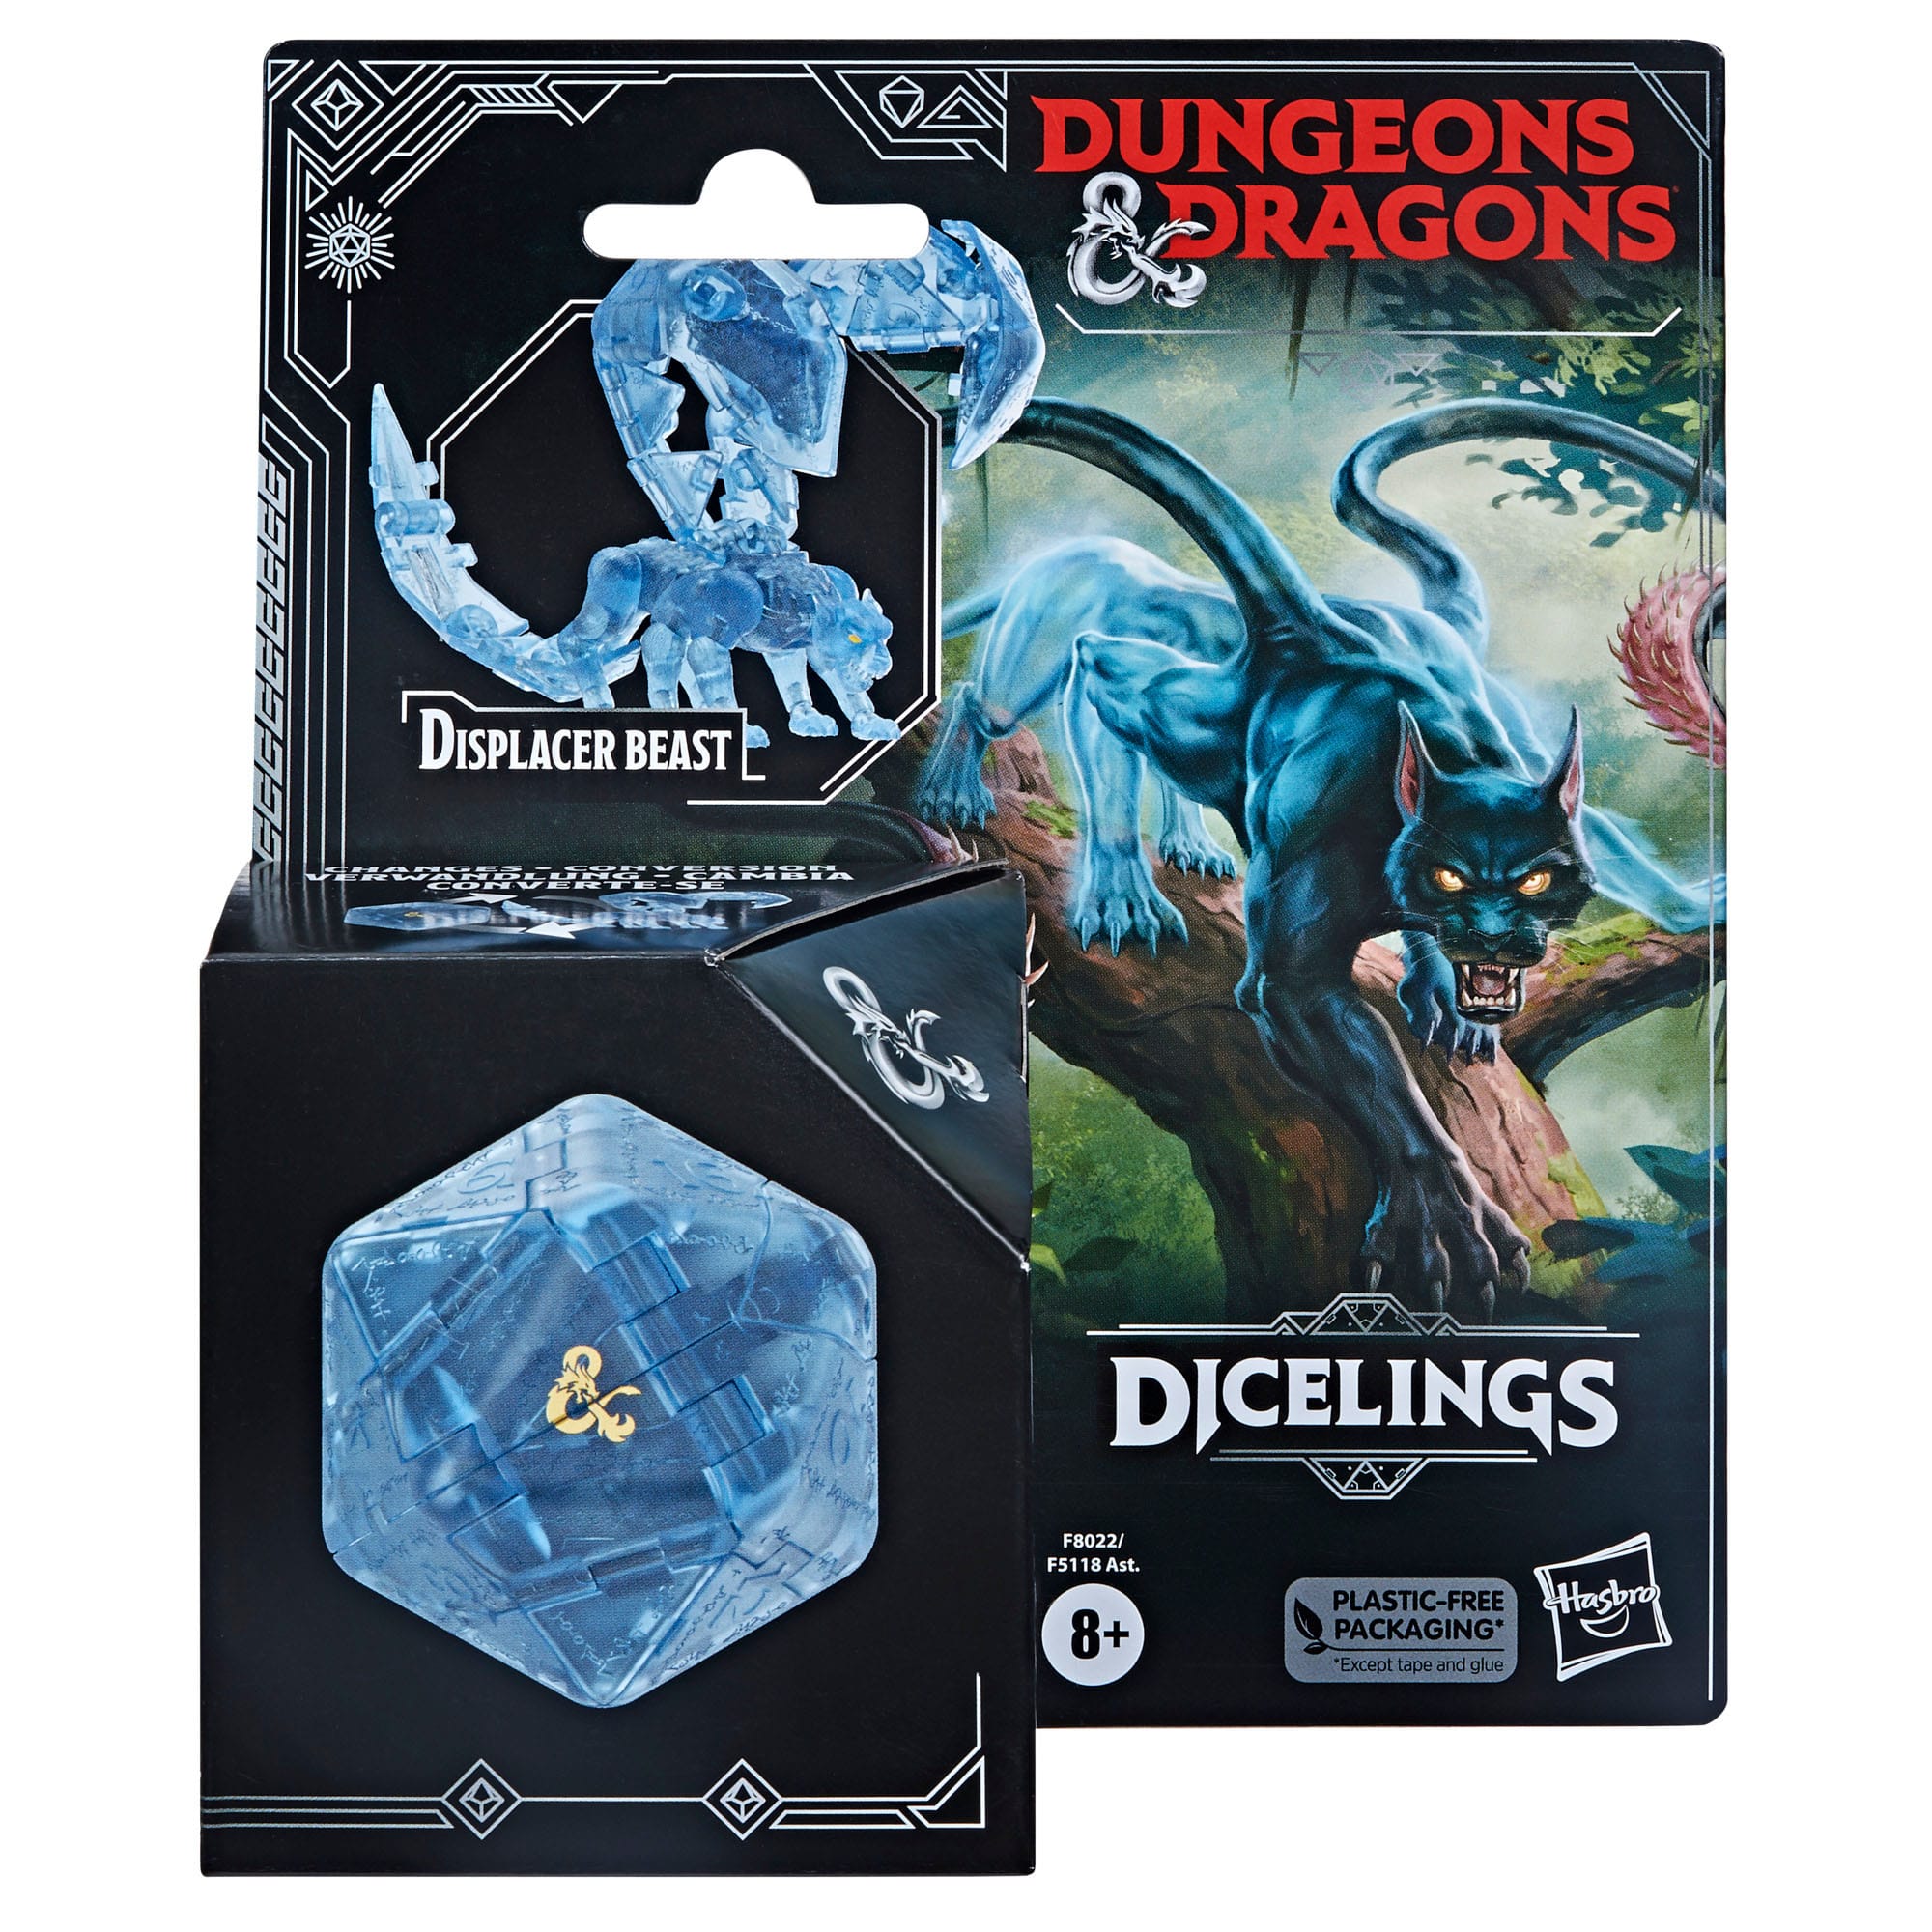 Dungeons & Dragons Dicelings Action Figure Displacer Beast - Loaded Dice Barry Vale of Glamorgan CF64 3HD